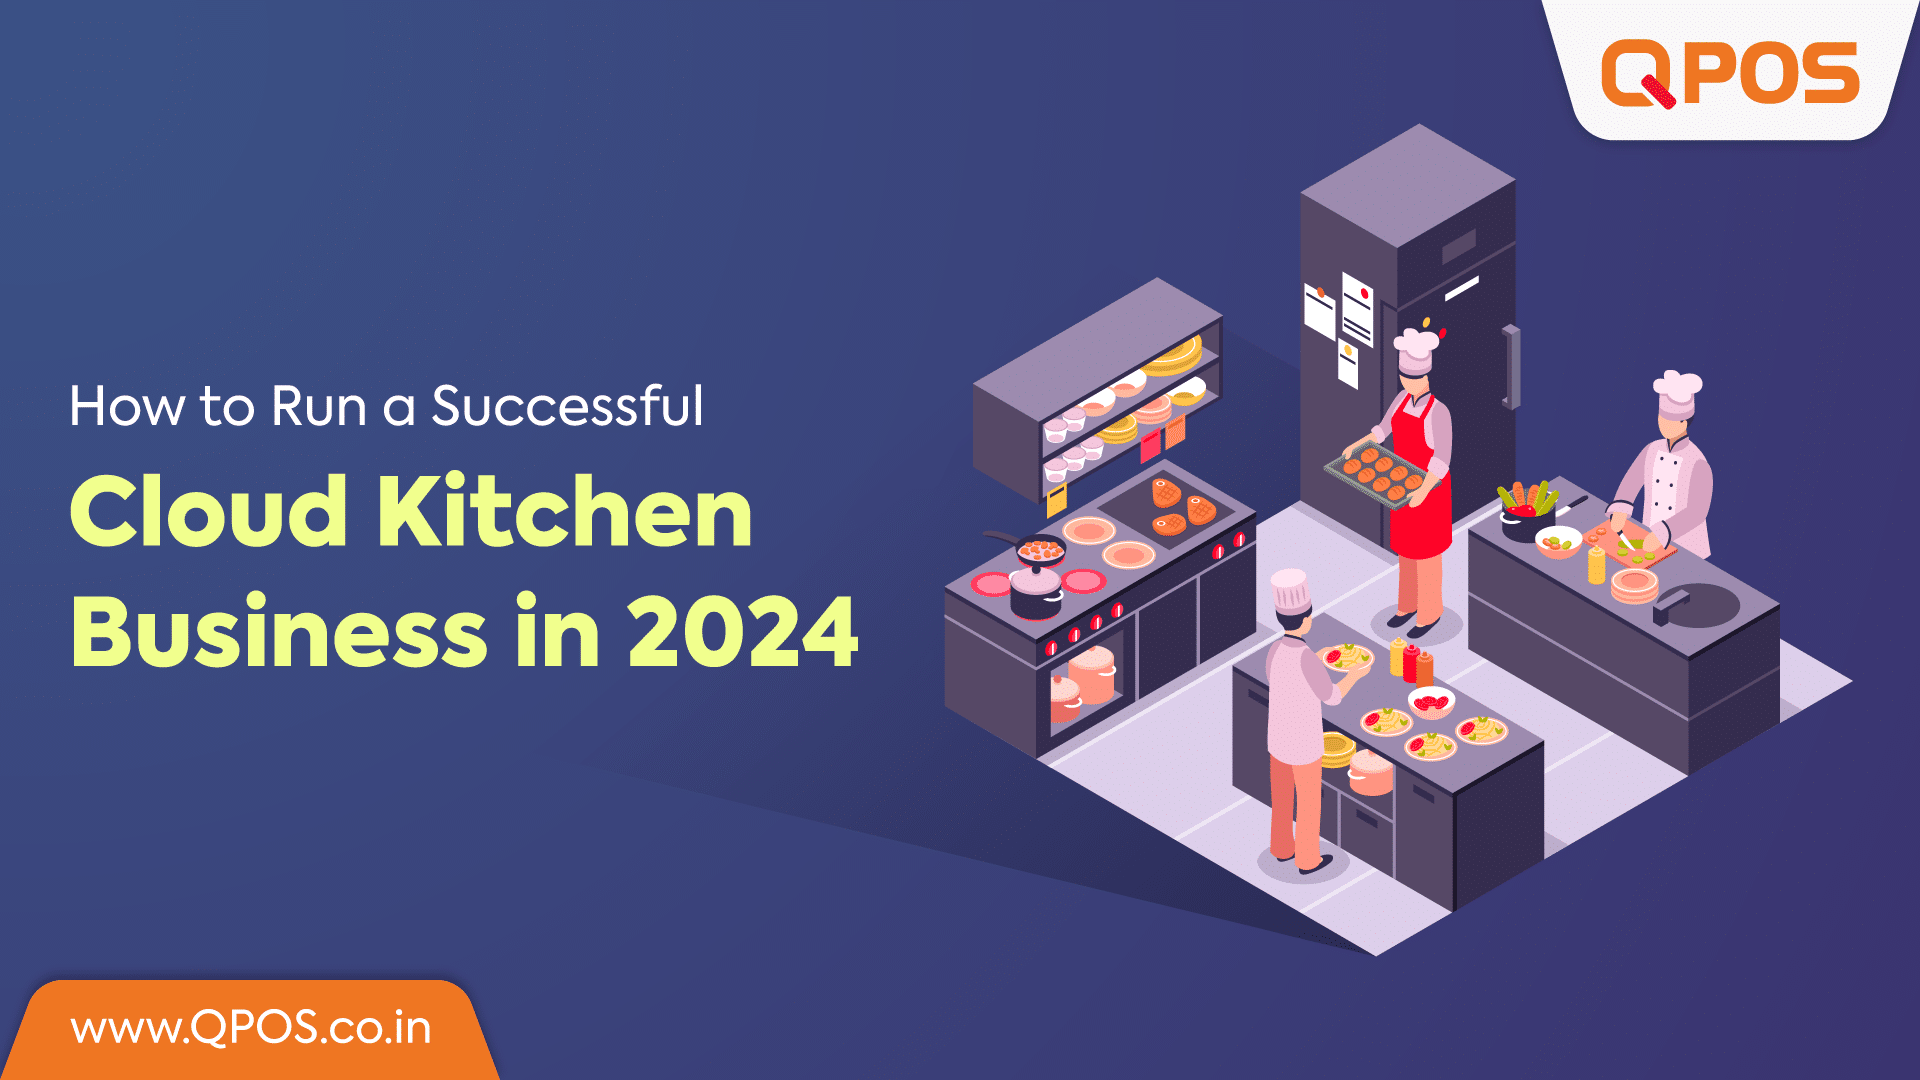 How to Run a Successful Cloud Kitchen Business in 2024